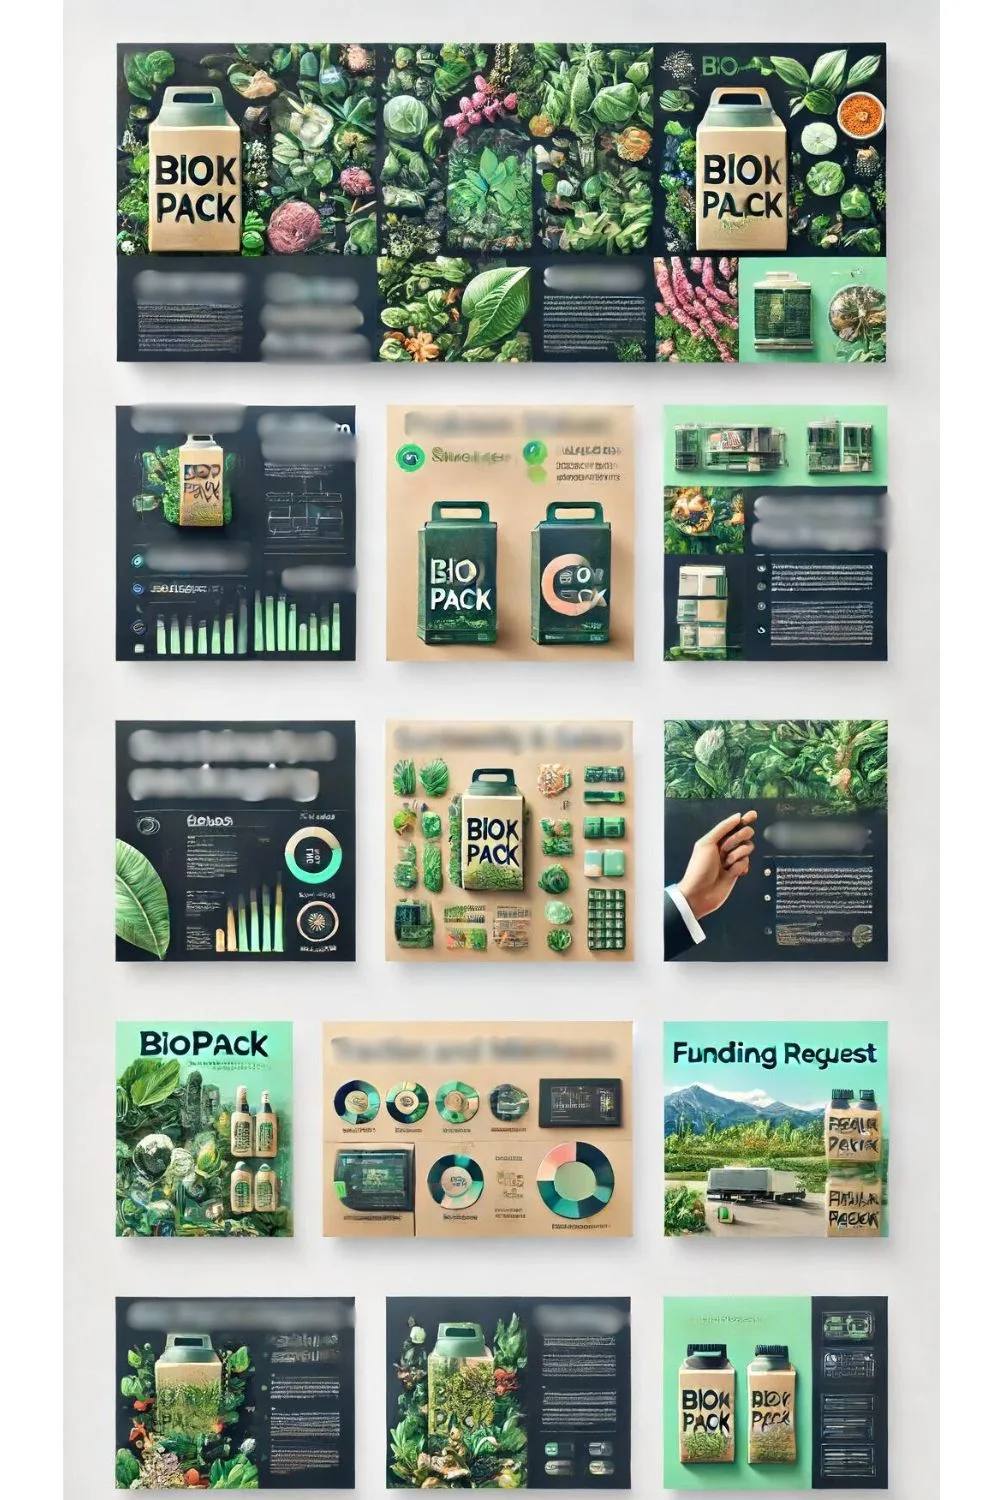 BioPack Packaging Pitch Deck example mockup